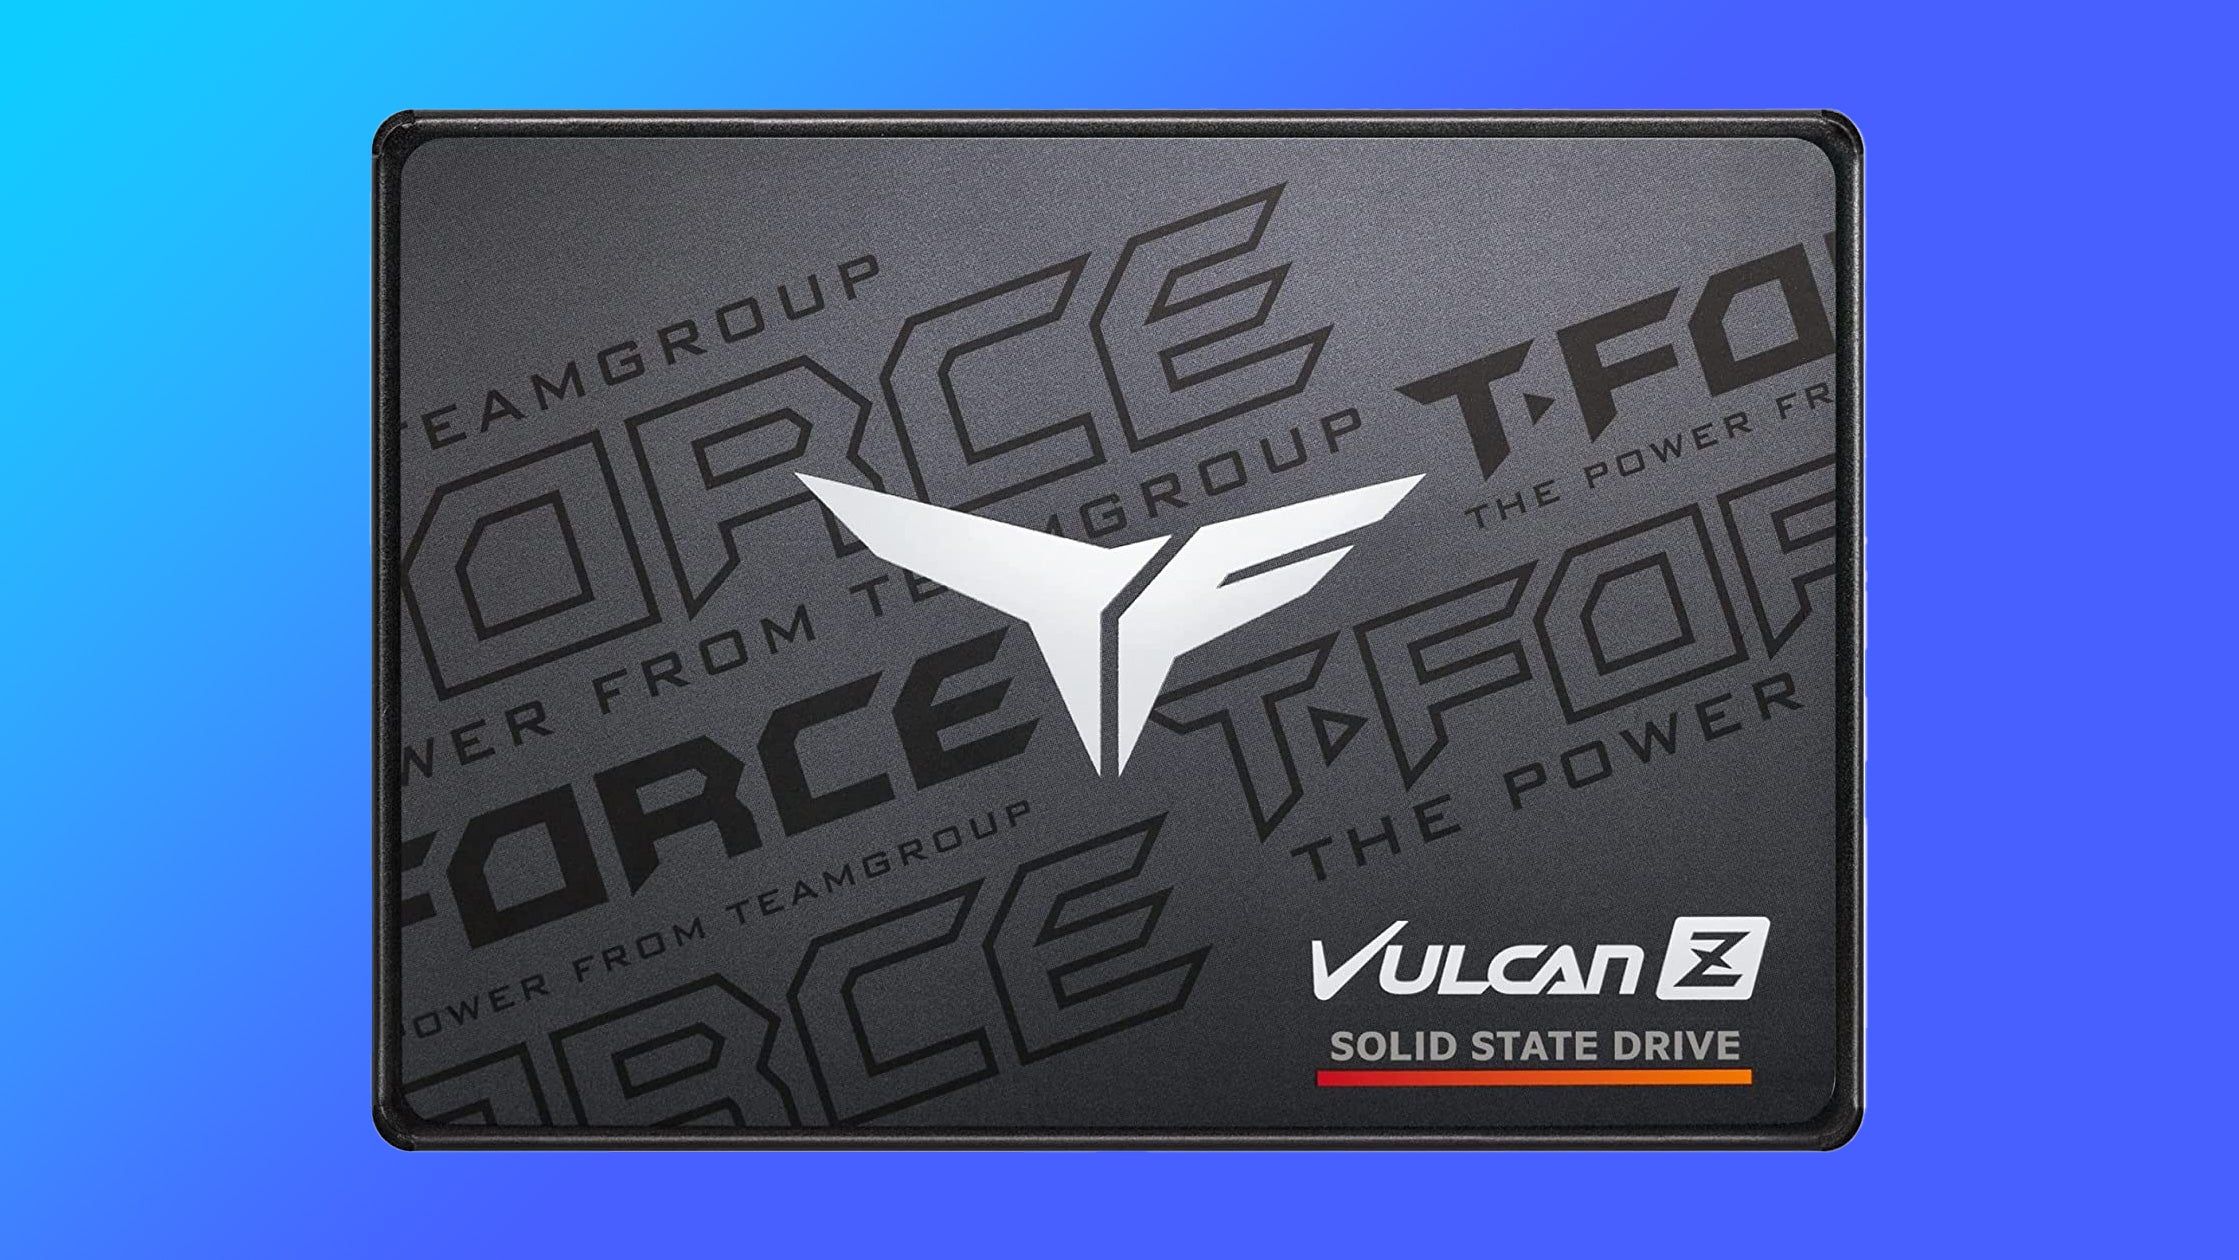 a t-force vulcan z sata ssd, shown with a metal case and wordy branding.